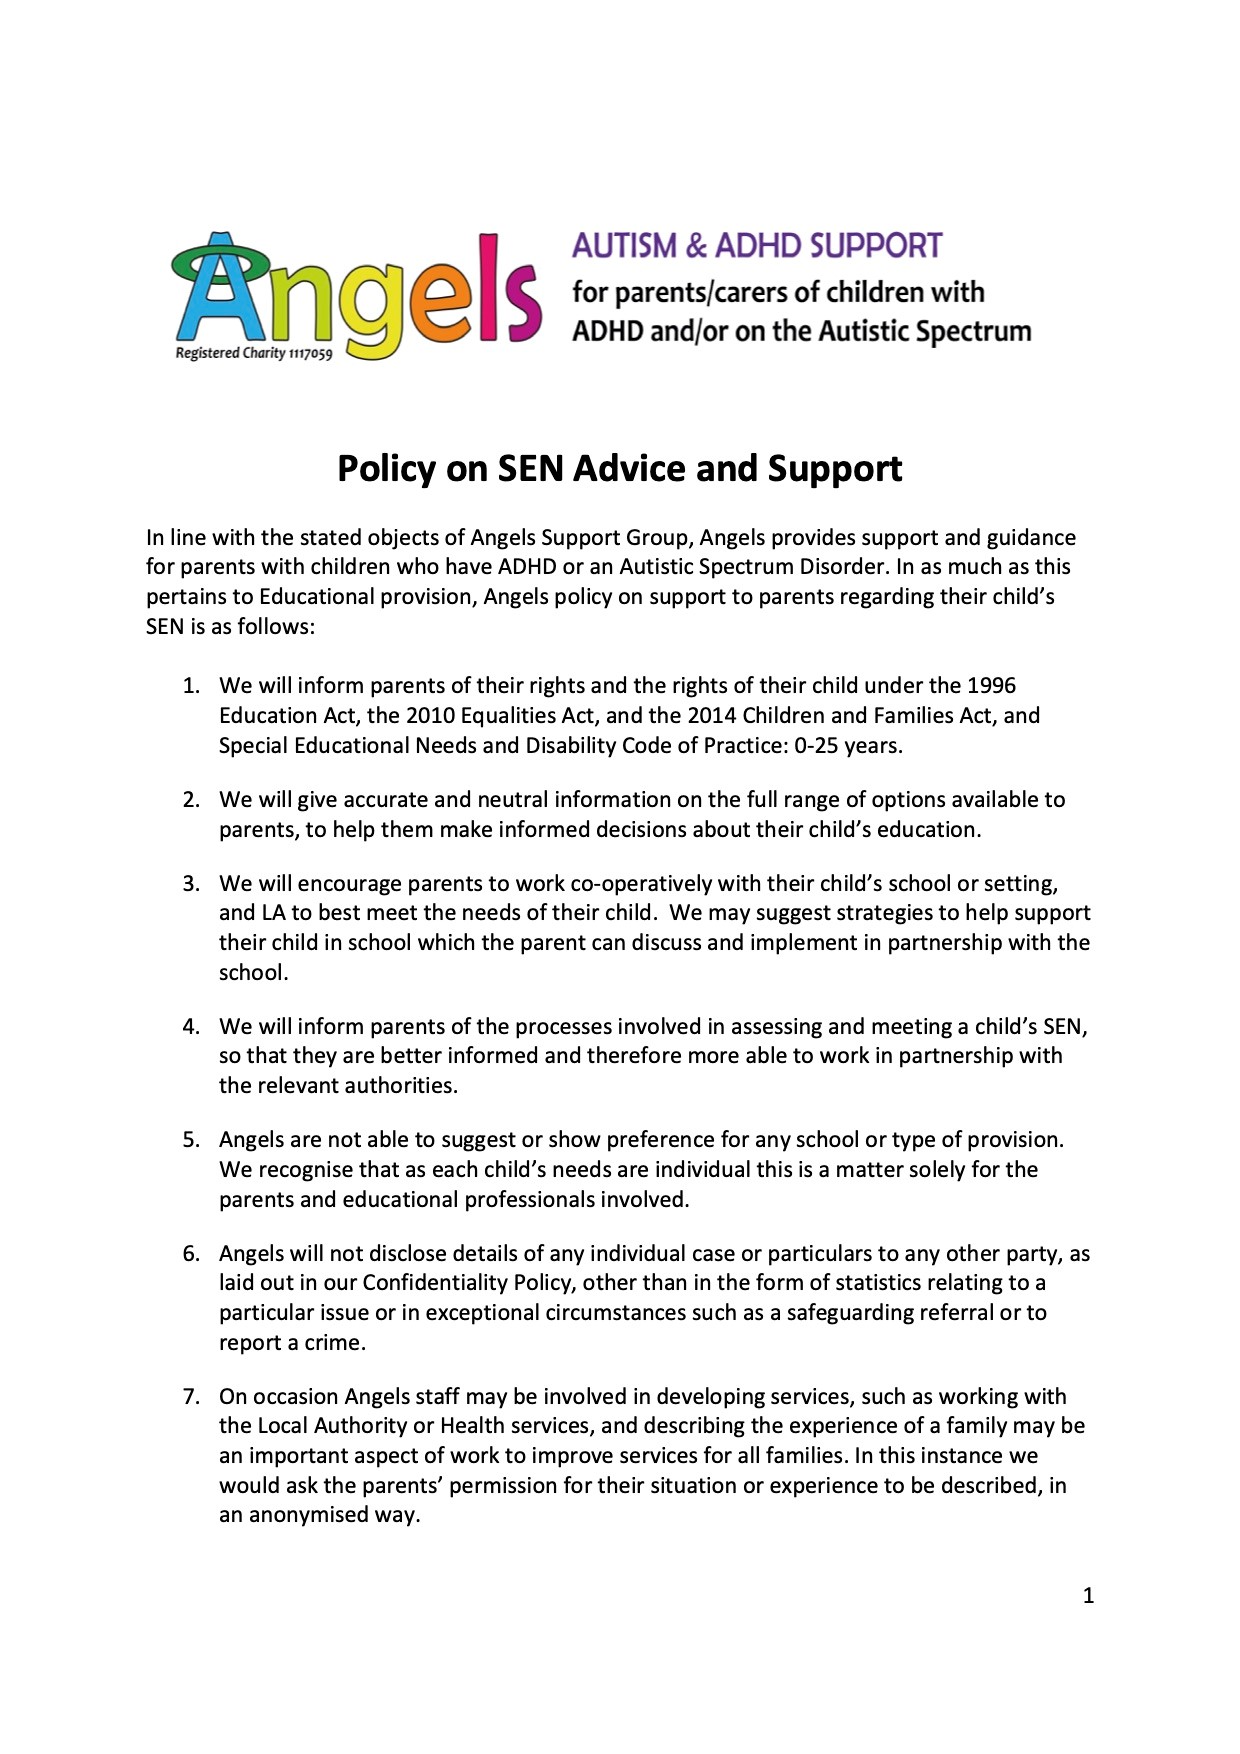 SEN Advice and Support Policy